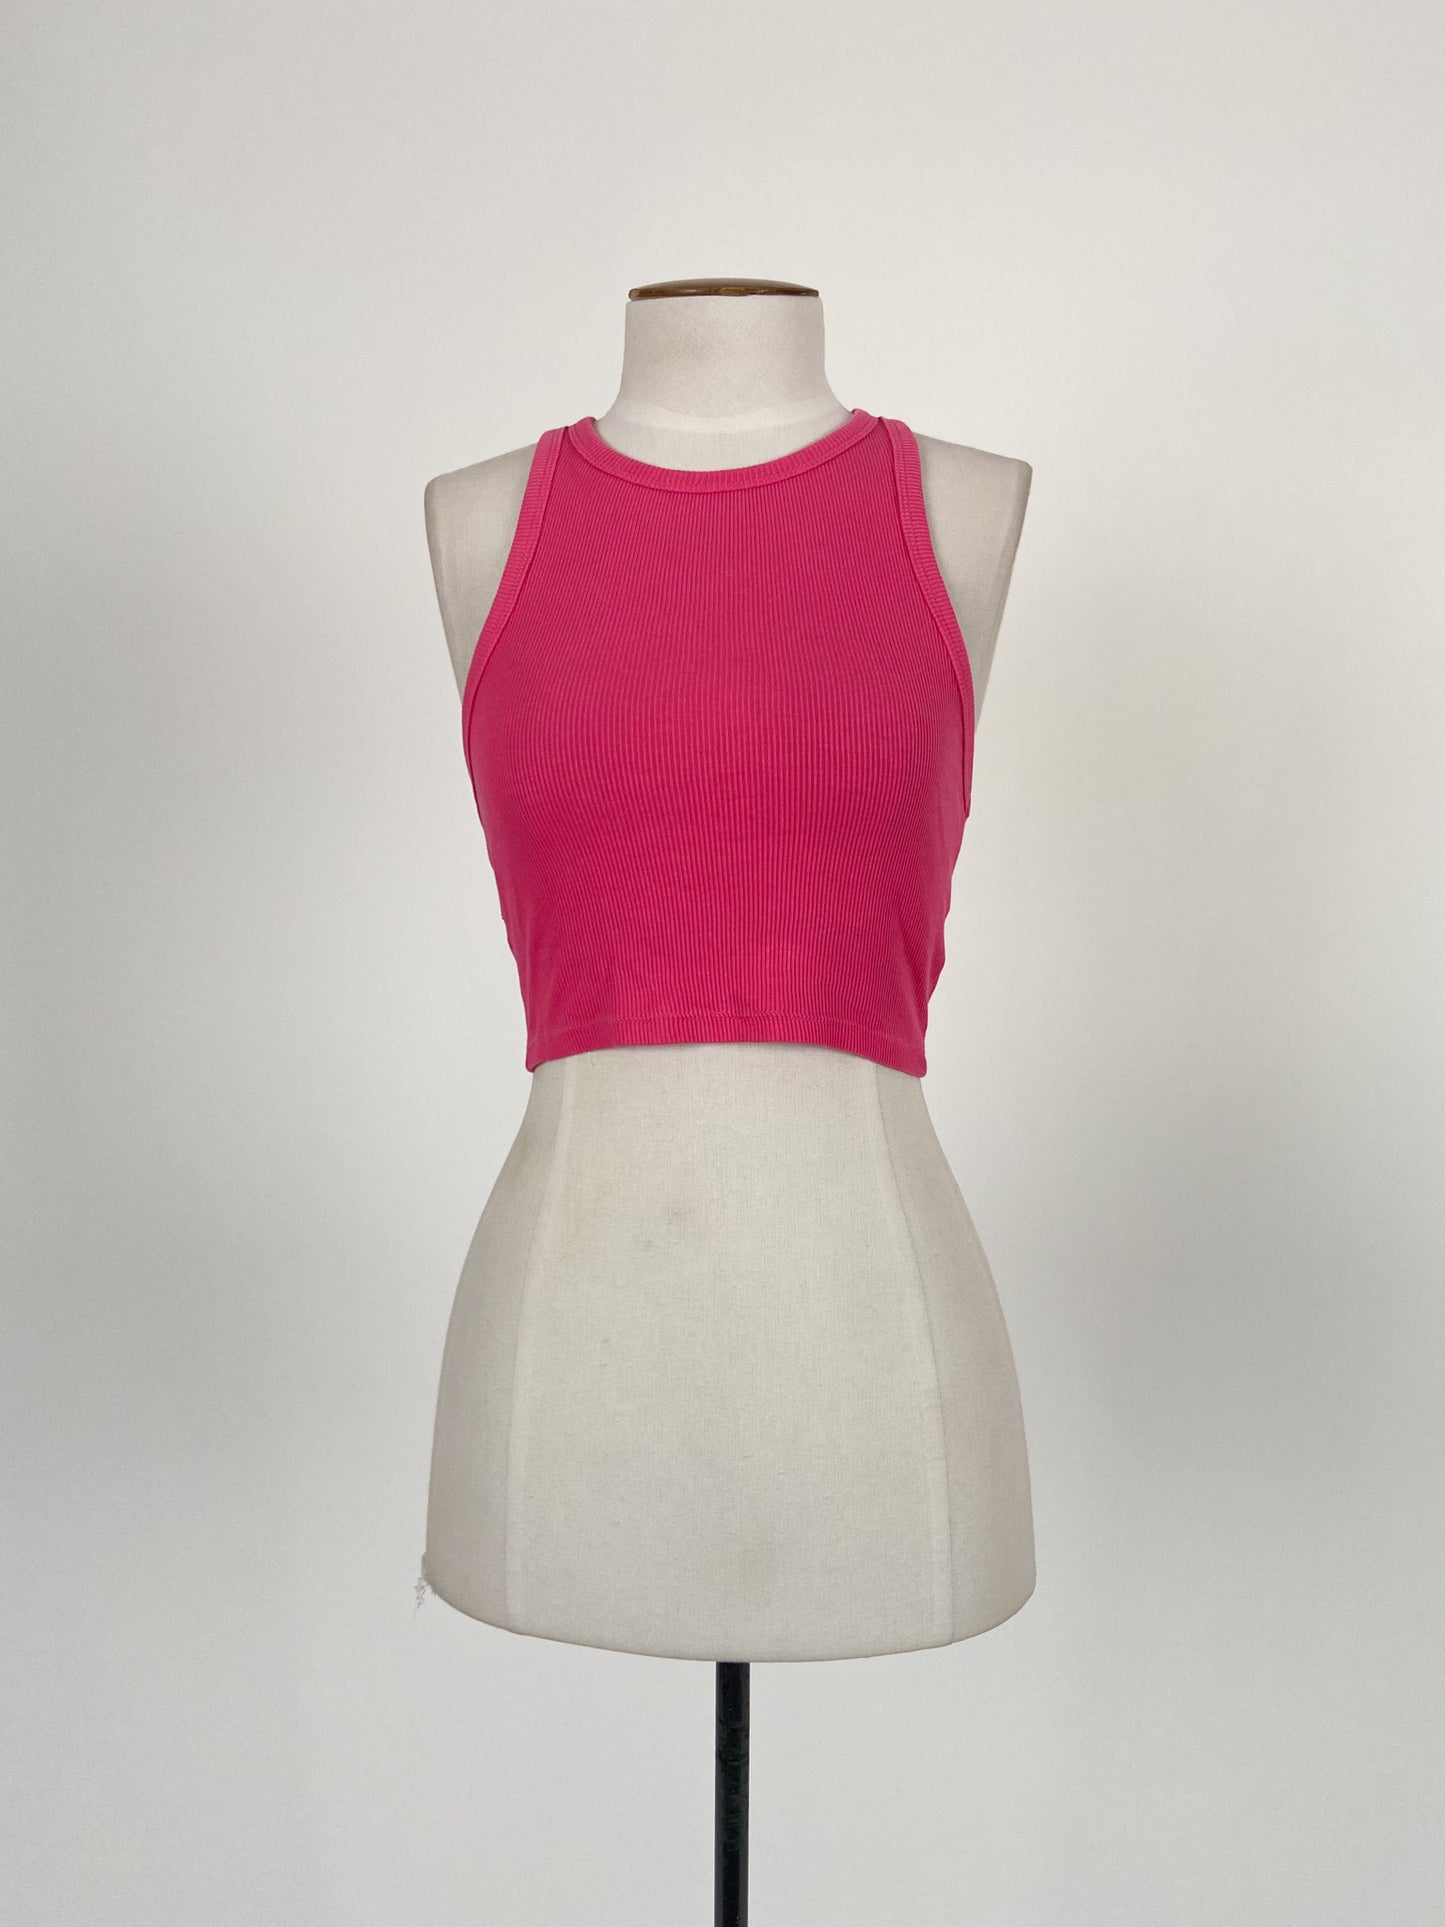 Zara | Pink Casual Top | Size S